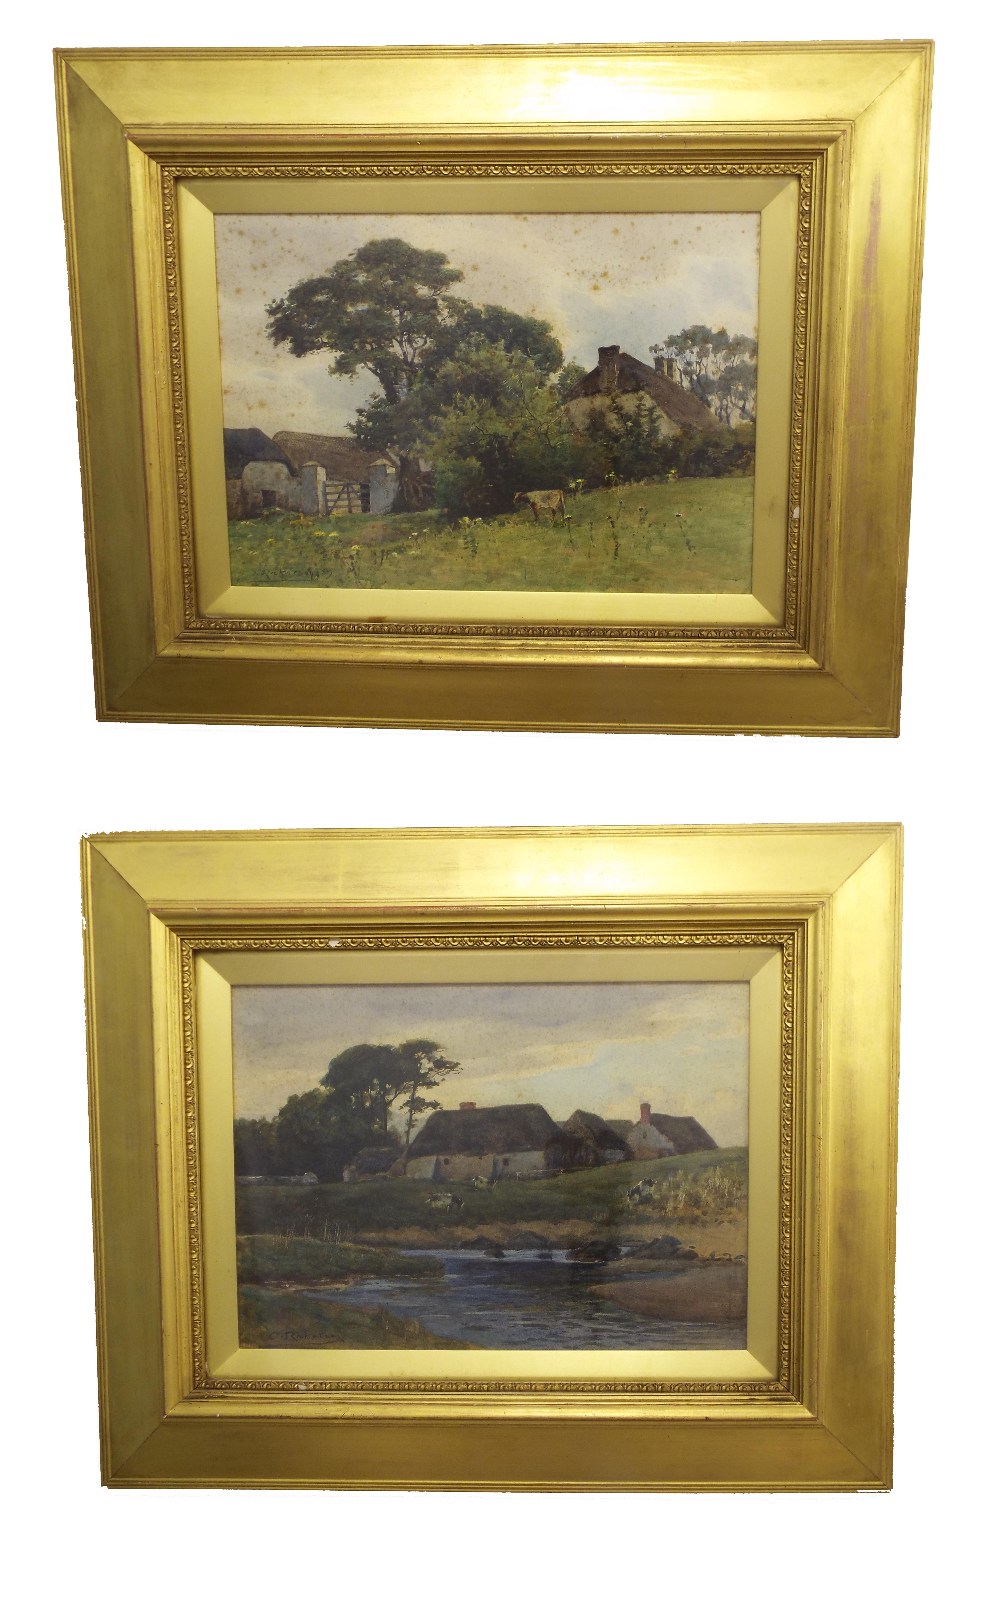 By Robert Octavius Rickatson (fl. 1880-1893) - pair of rural landscapes with livestock, signed,